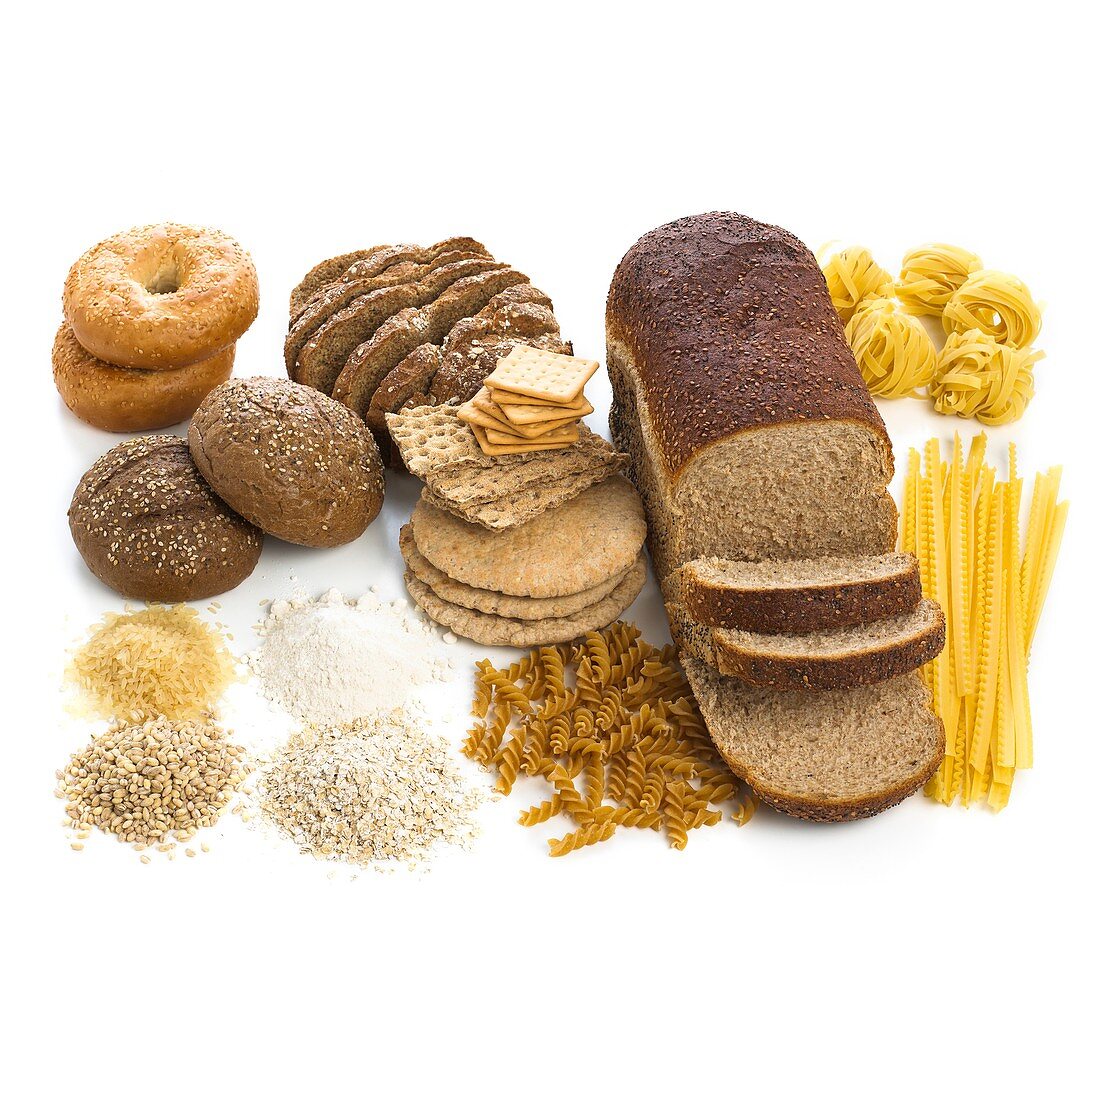 Selection of breads and pastas